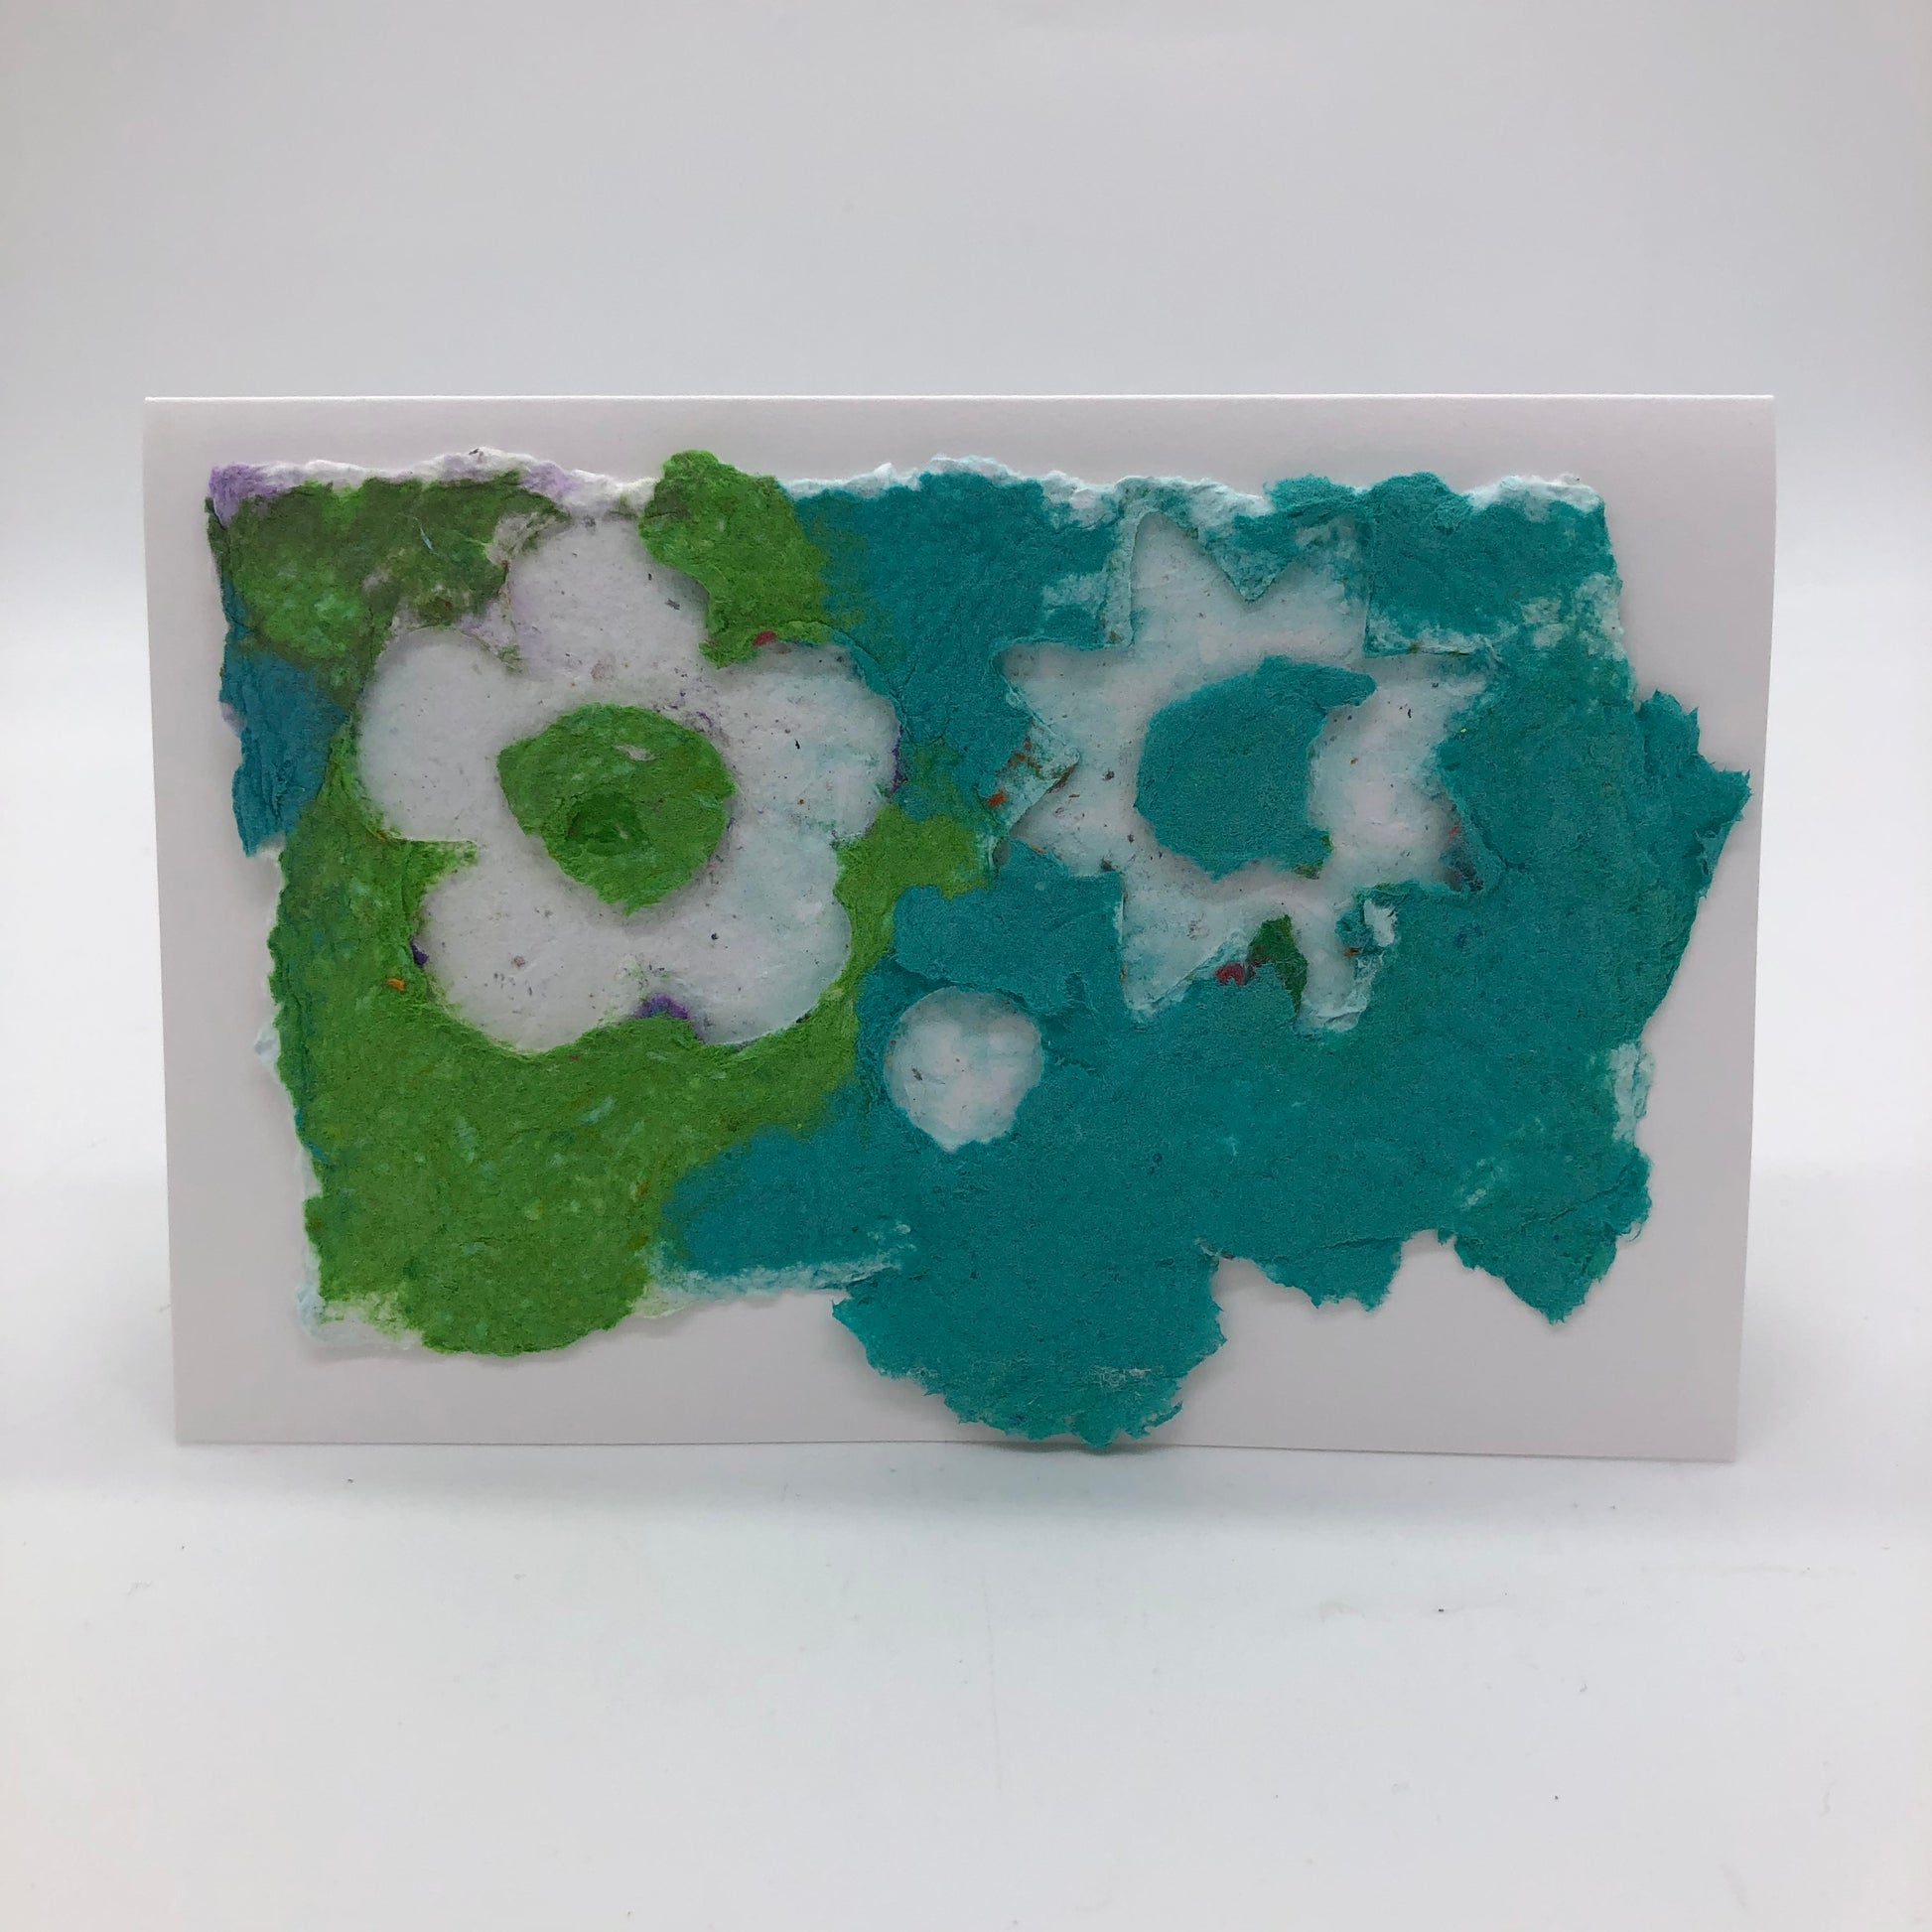 Horizontal greeting card made with handmade paper in bright green and teal.  Two cute flower shapes on top, both in white.  One flower has rounded petals, the other pointed petals.